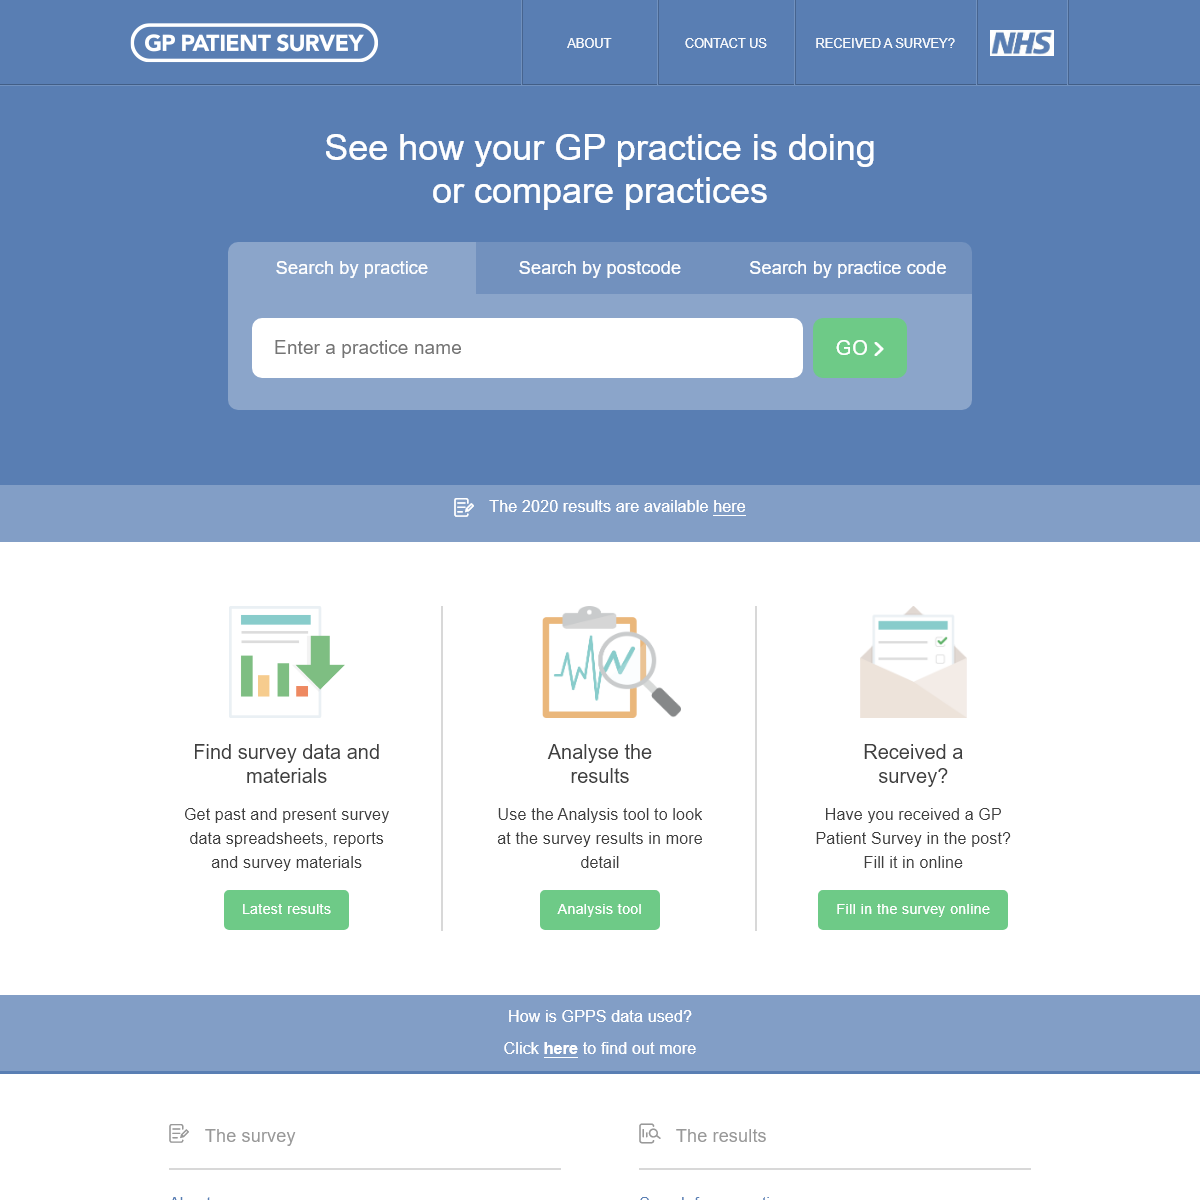 A complete backup of gp-patient.co.uk